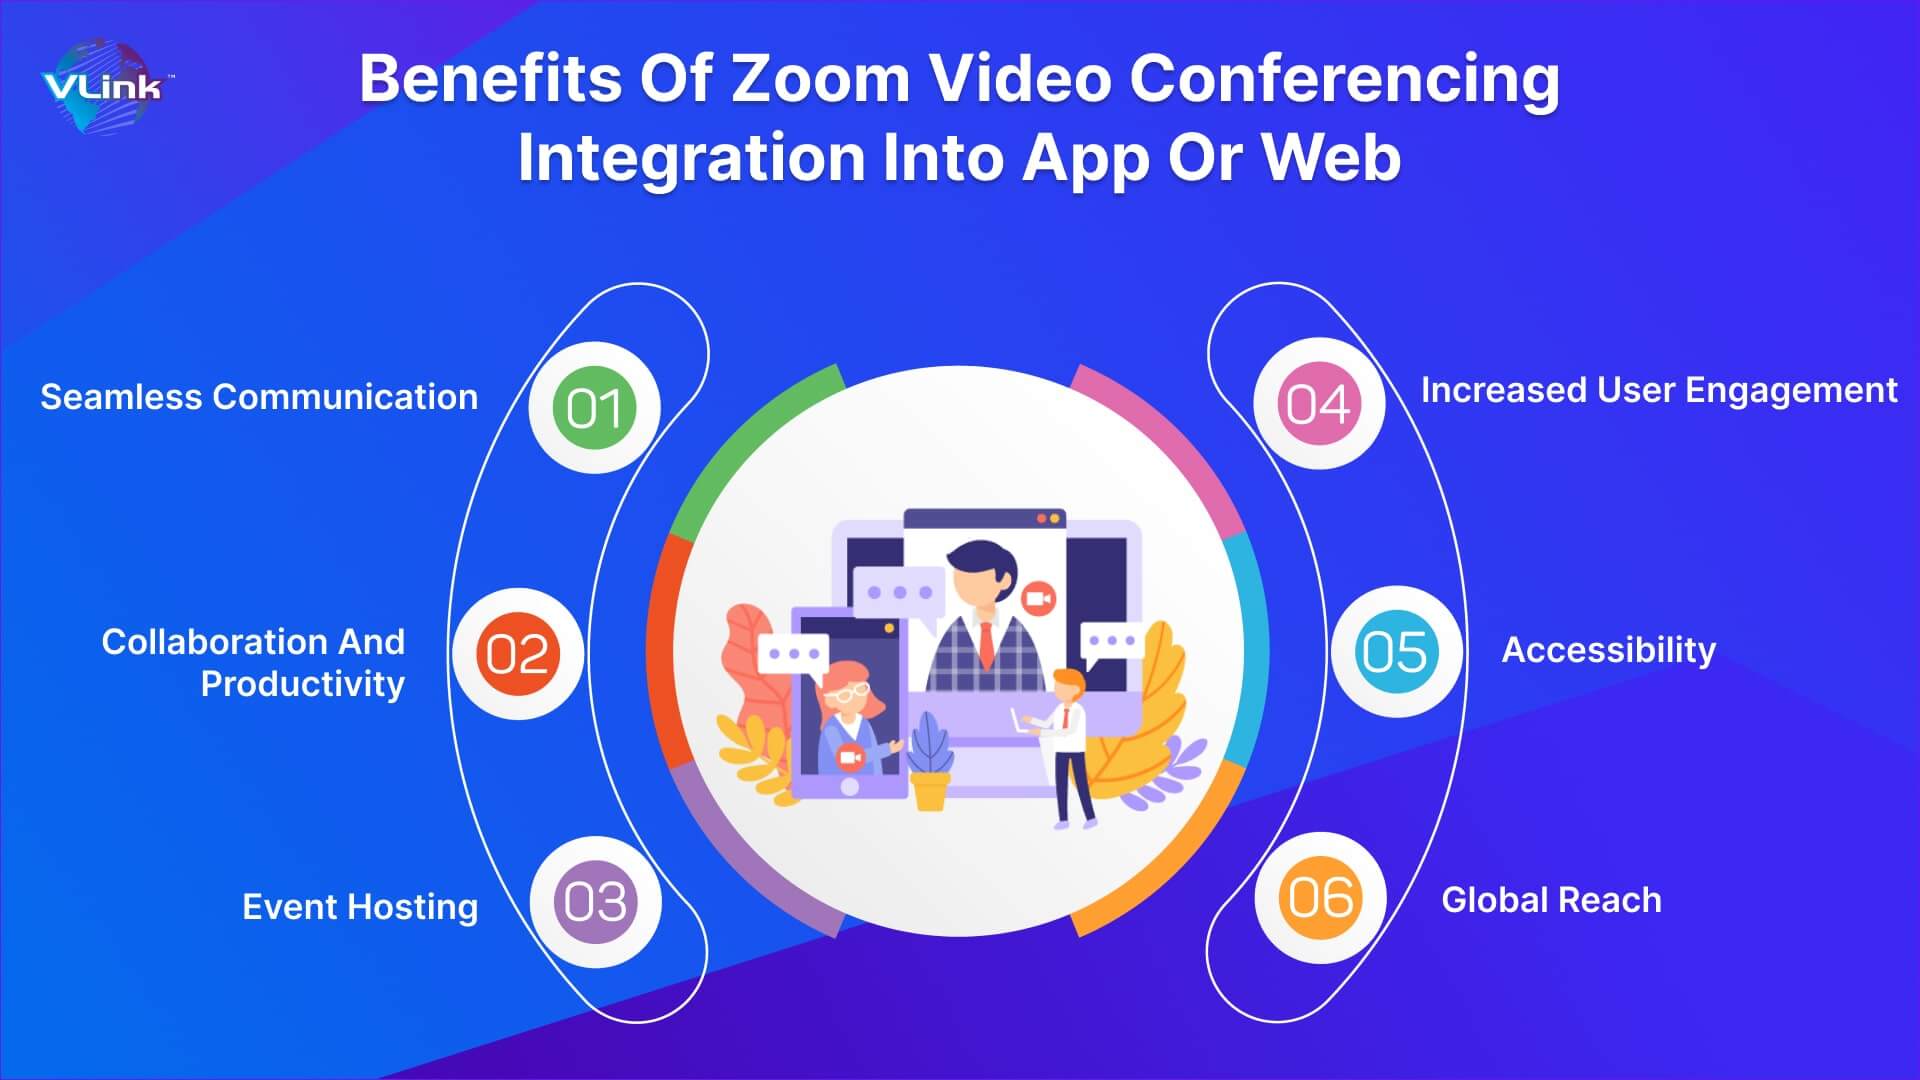 Benefits of zoom video conferencing integration into app or web